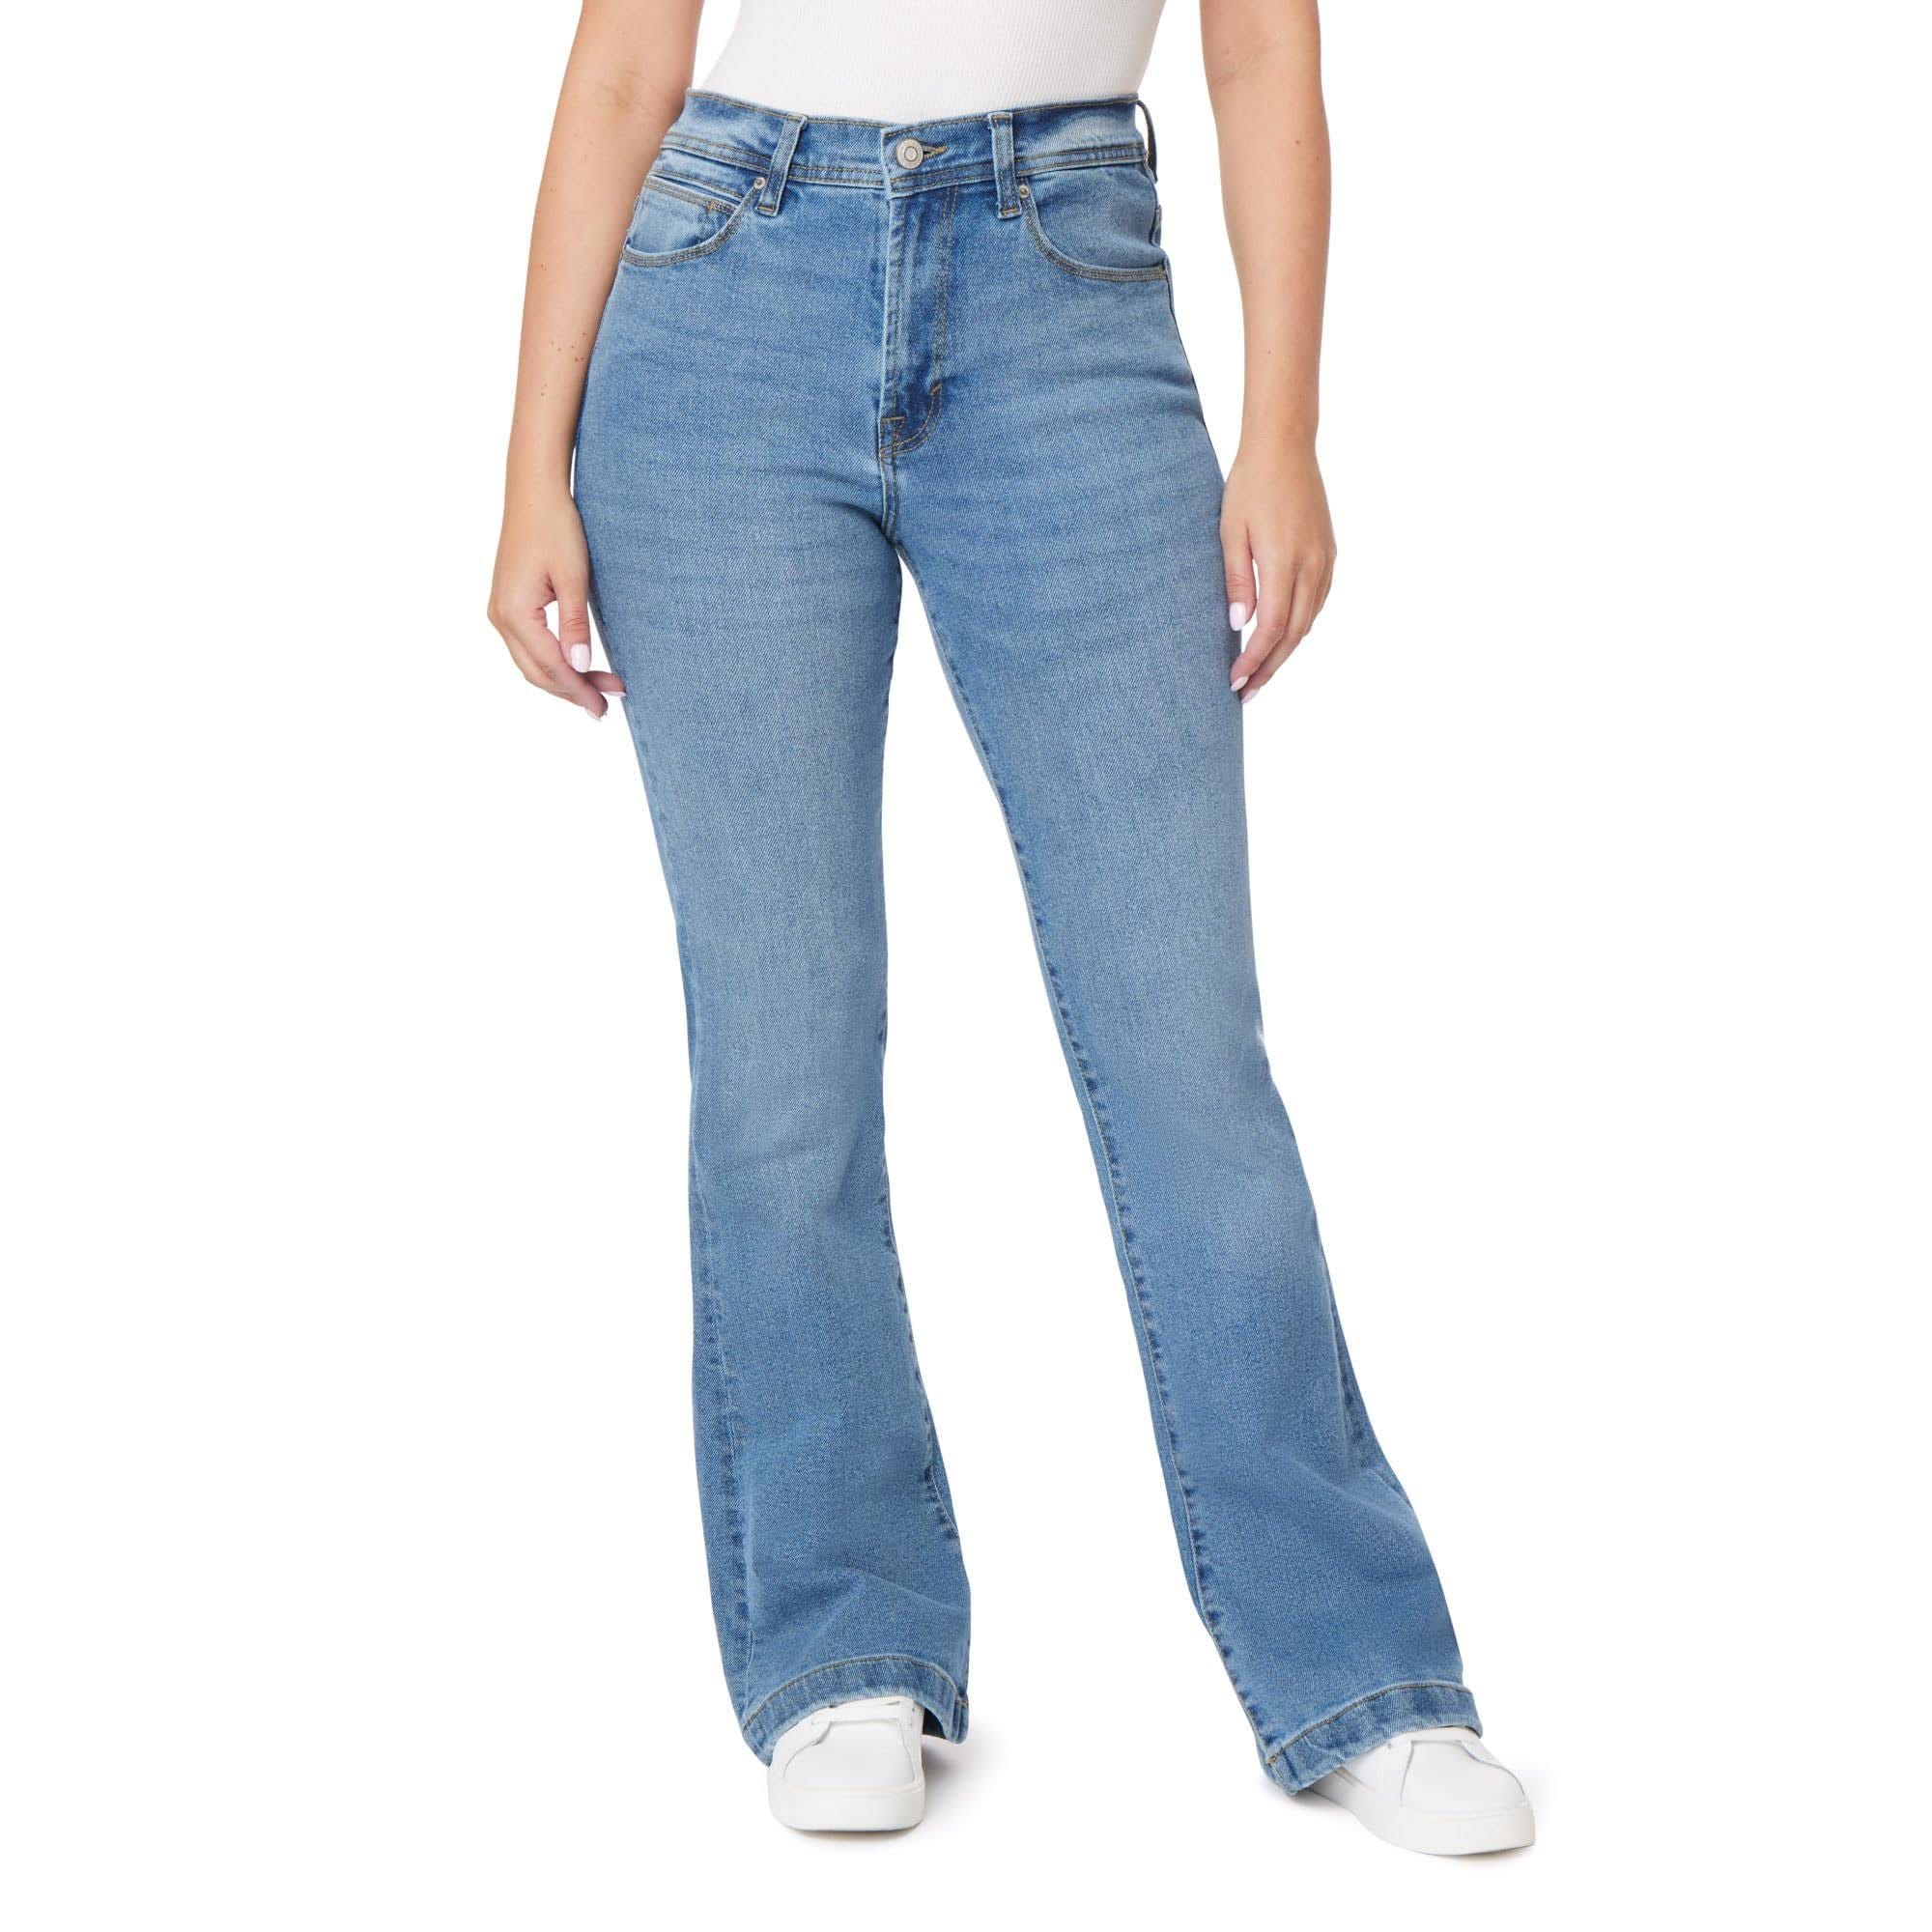 Comfortable High Waisted Flared Jeans for a Stylish Look | Image